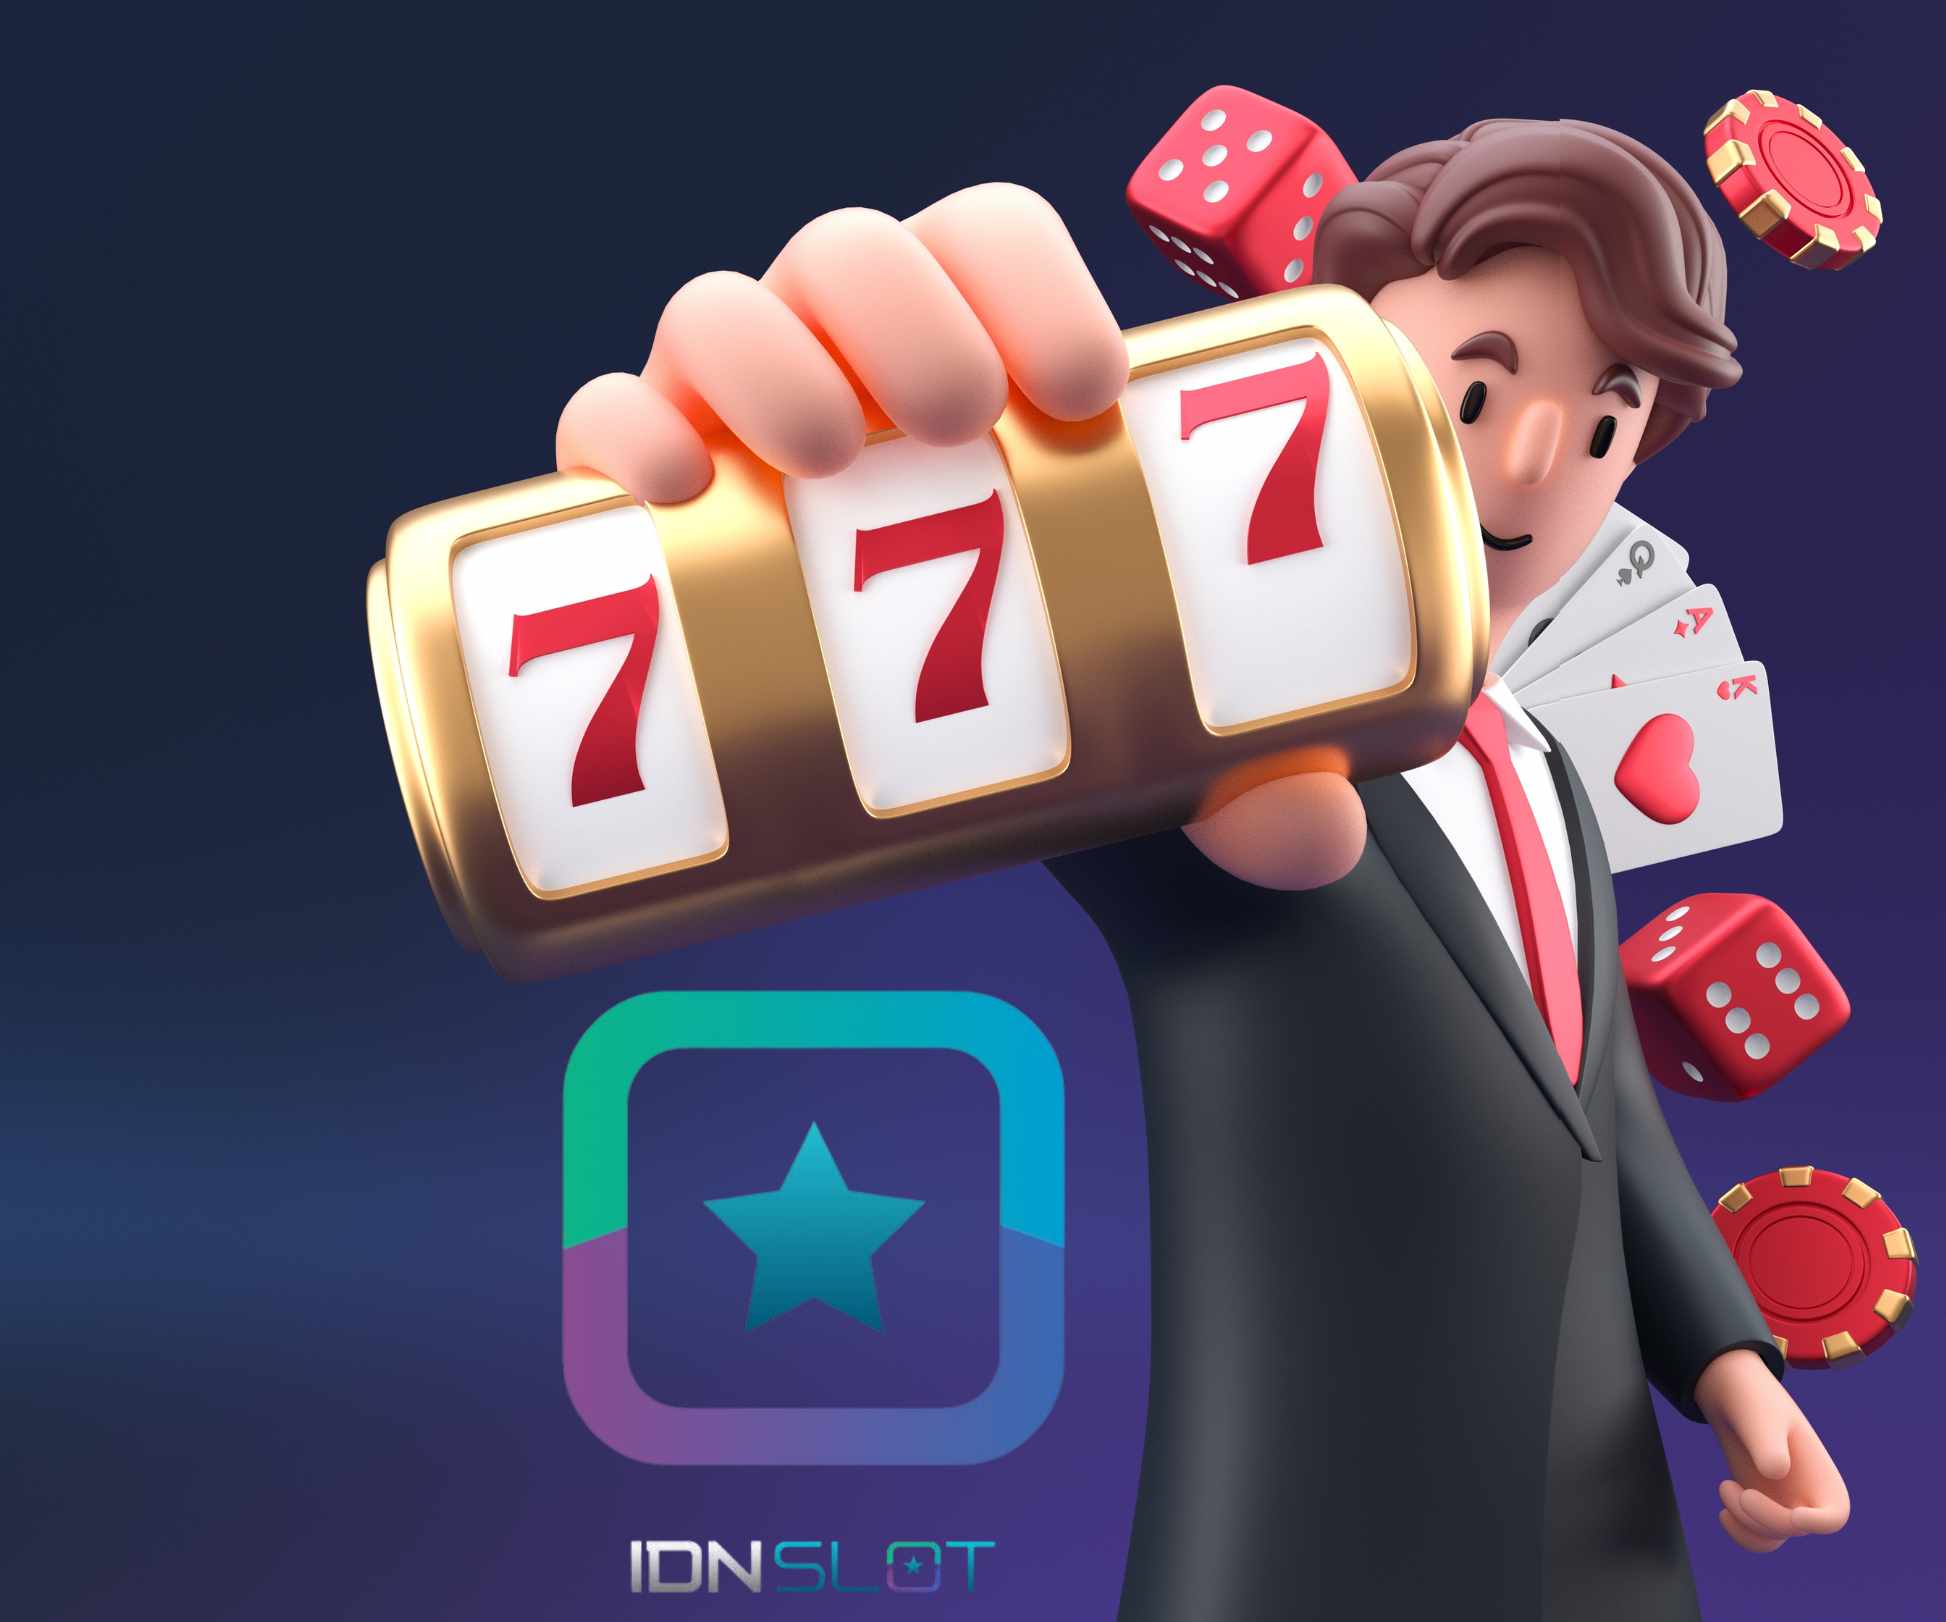 The idn slot game has now become the target of players